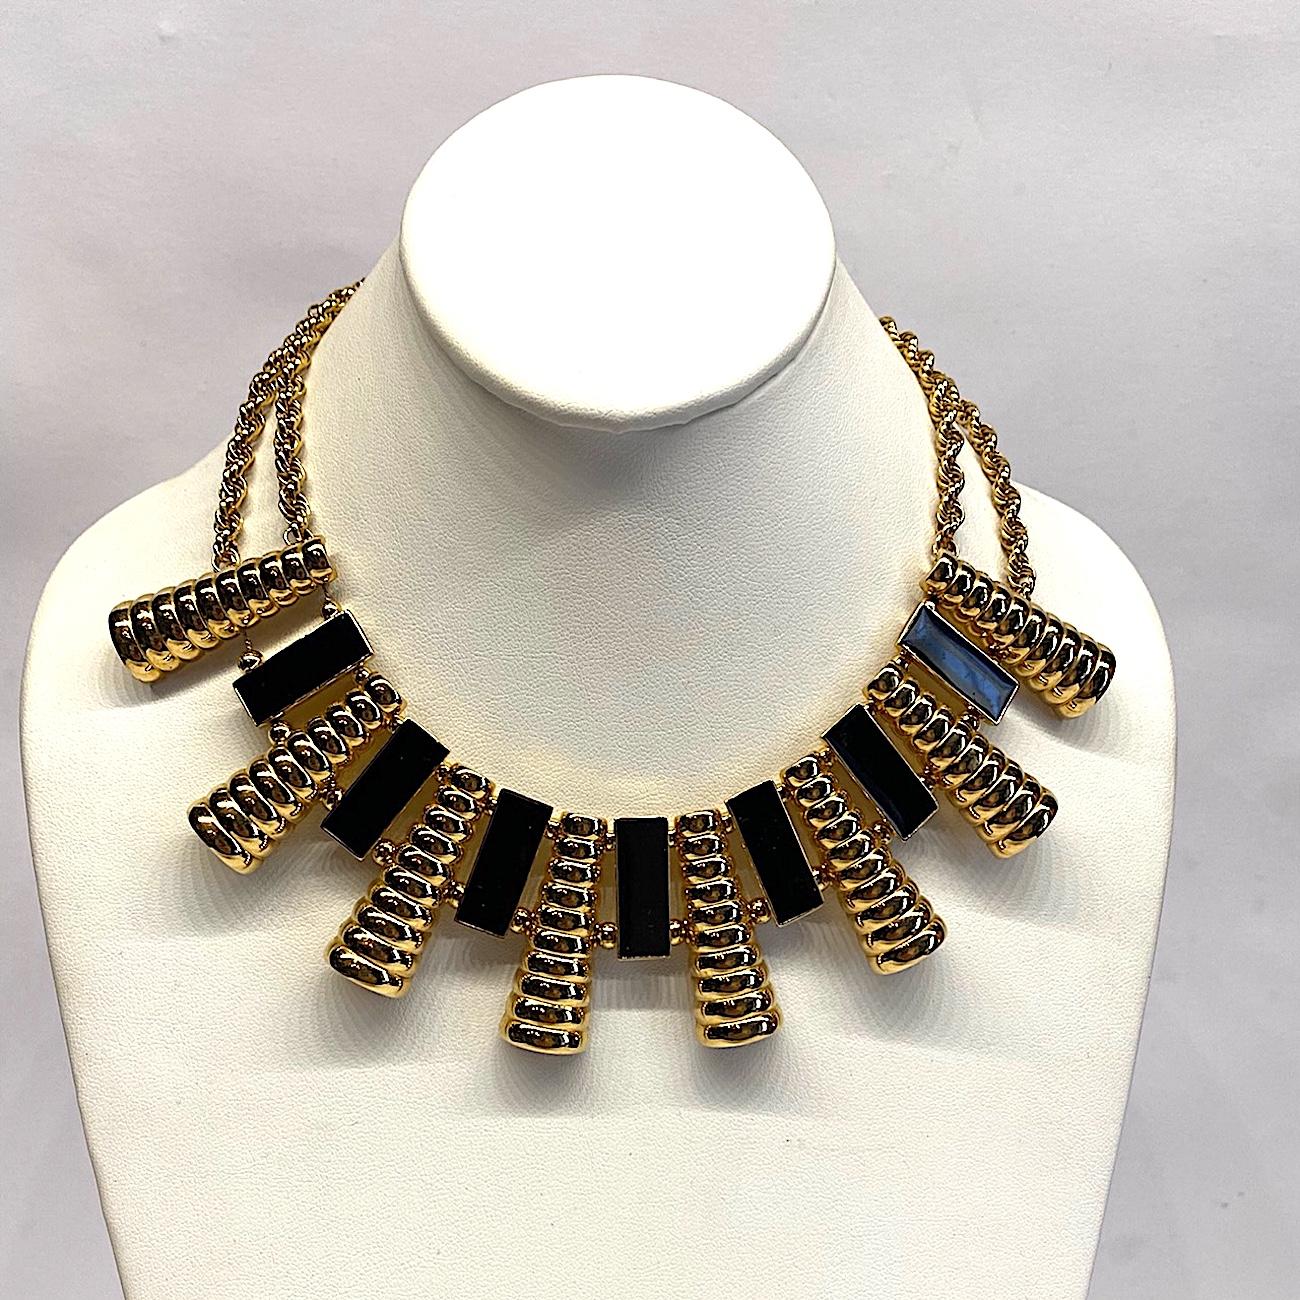 A tailored Art Deco revival necklace by Givenchy from the 1980s. The front bib piece is a combination of long curved and ribbed links alternating with rectangular links with black enamel centers. They are strung on chain with small bead spacer